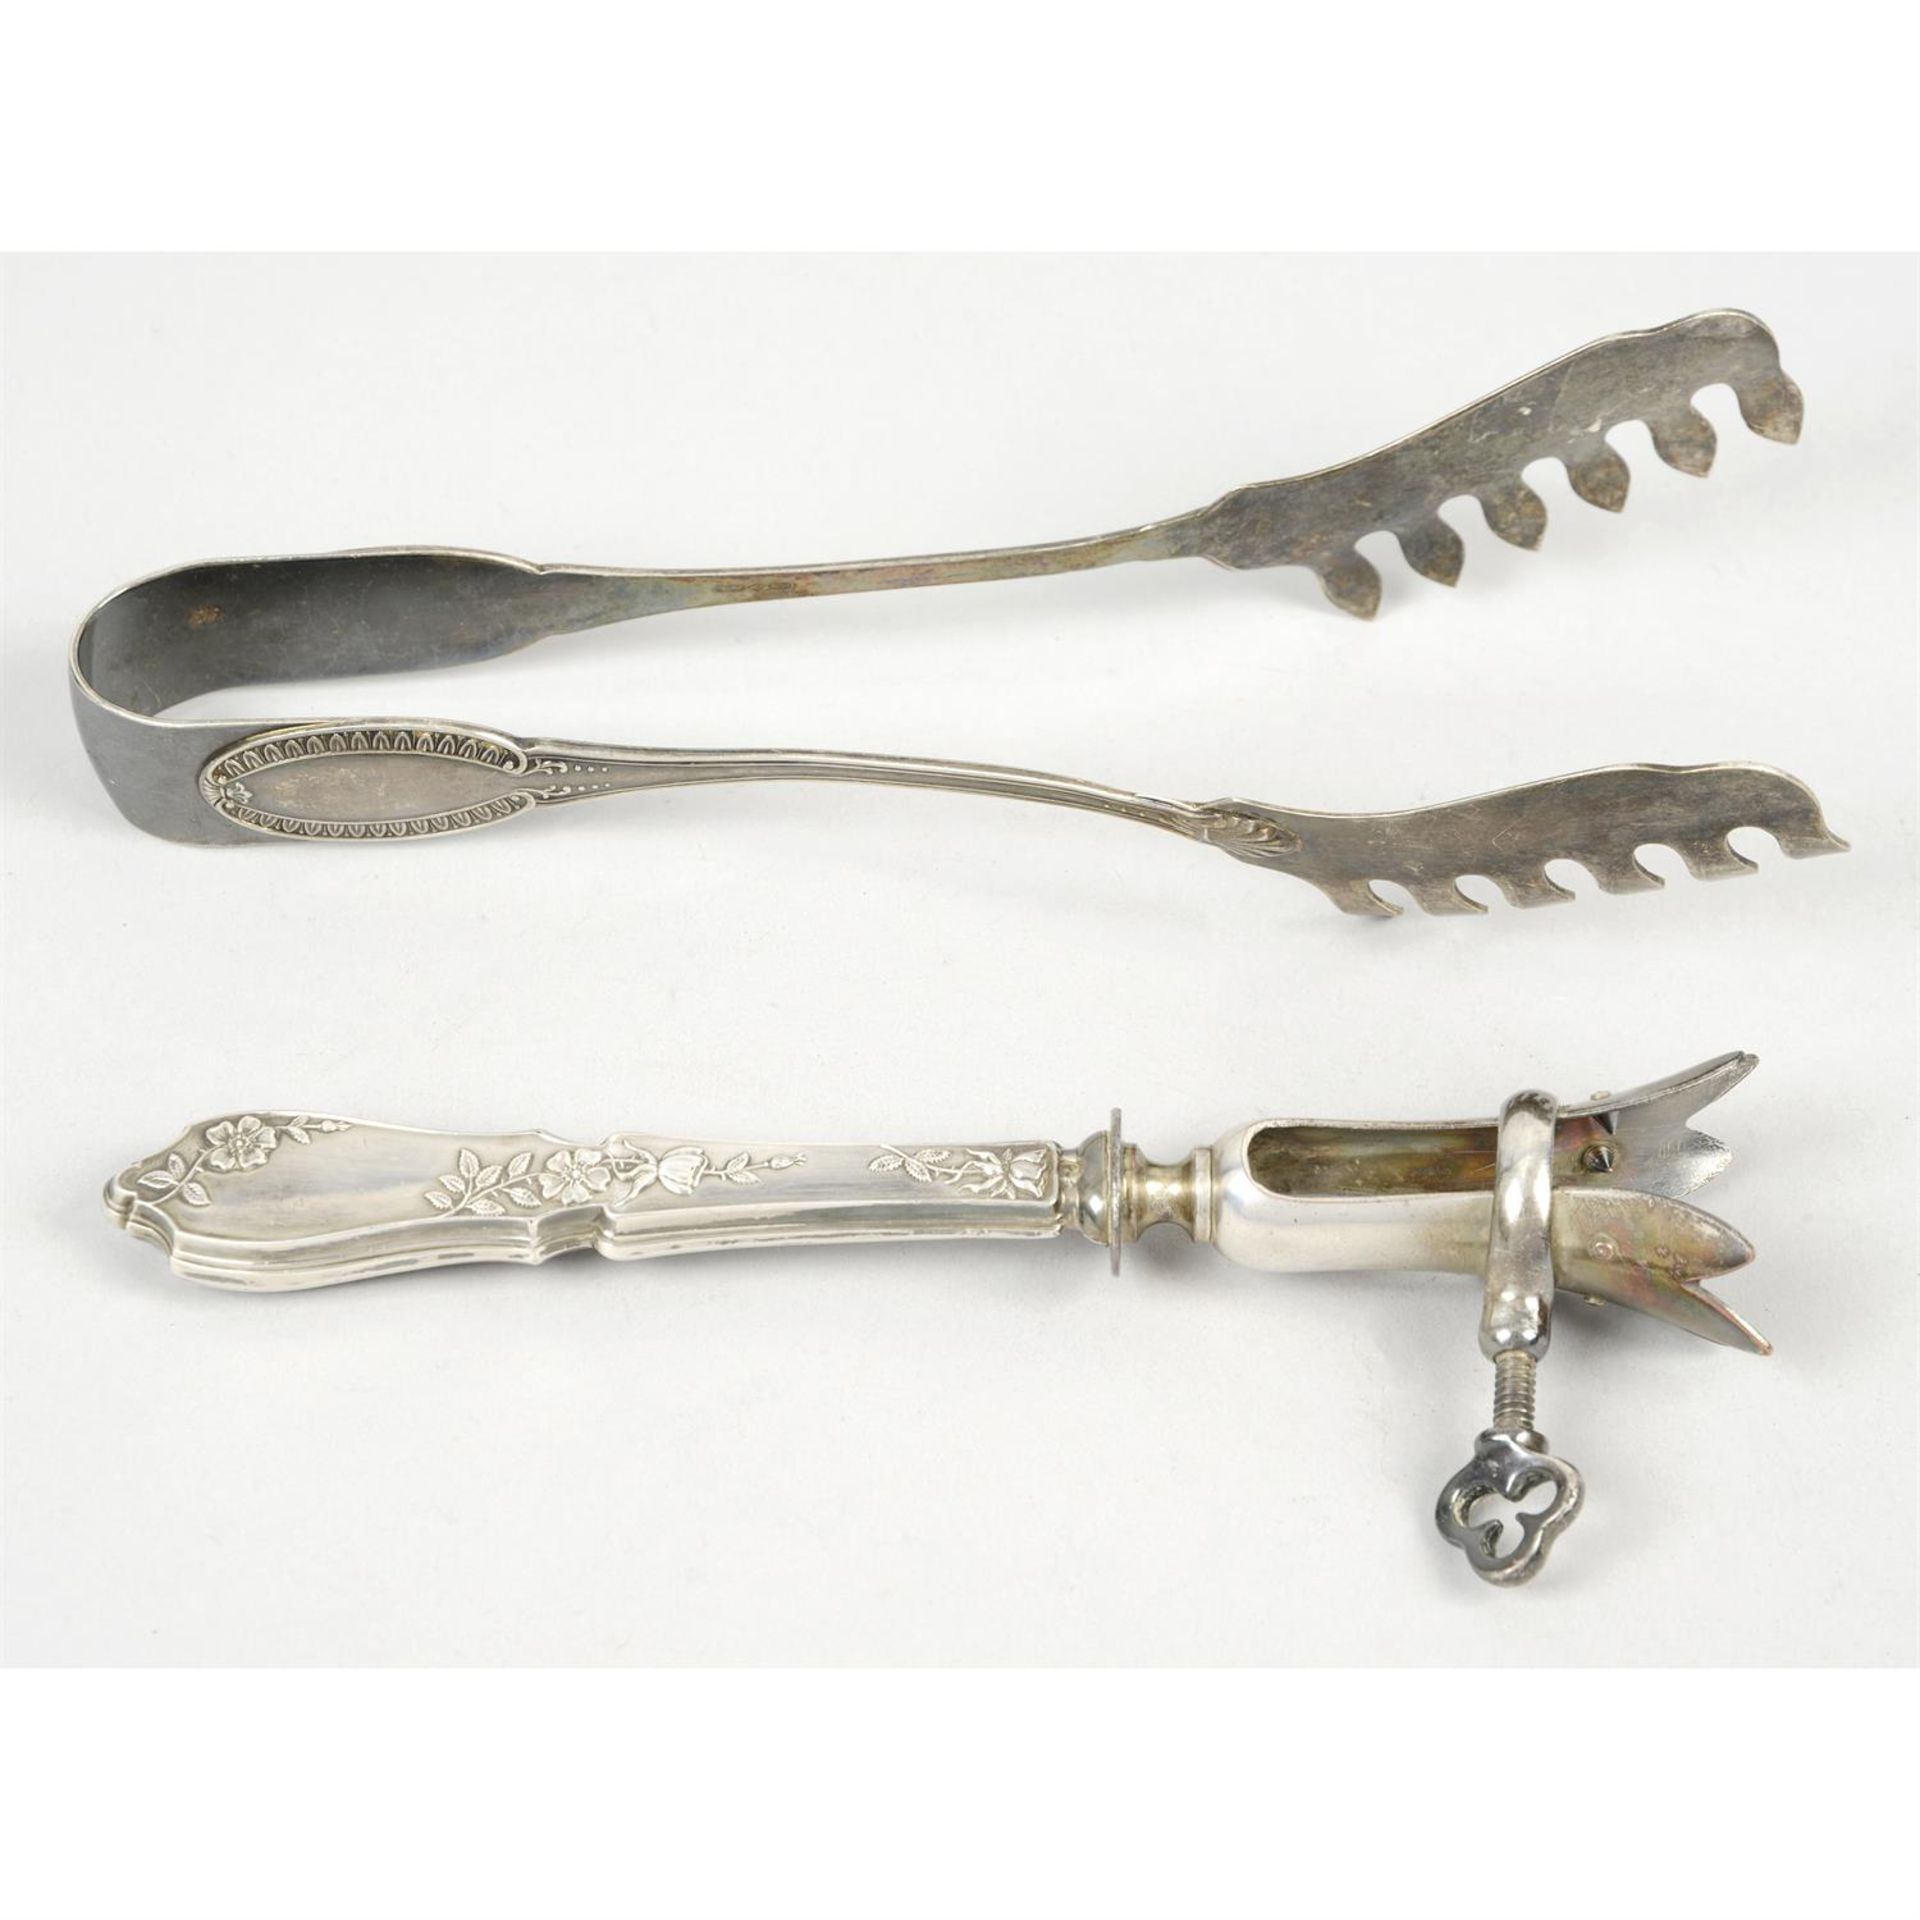 A French silver-handled & steel ham-bone holder; together with a pair of Italian 800 standard